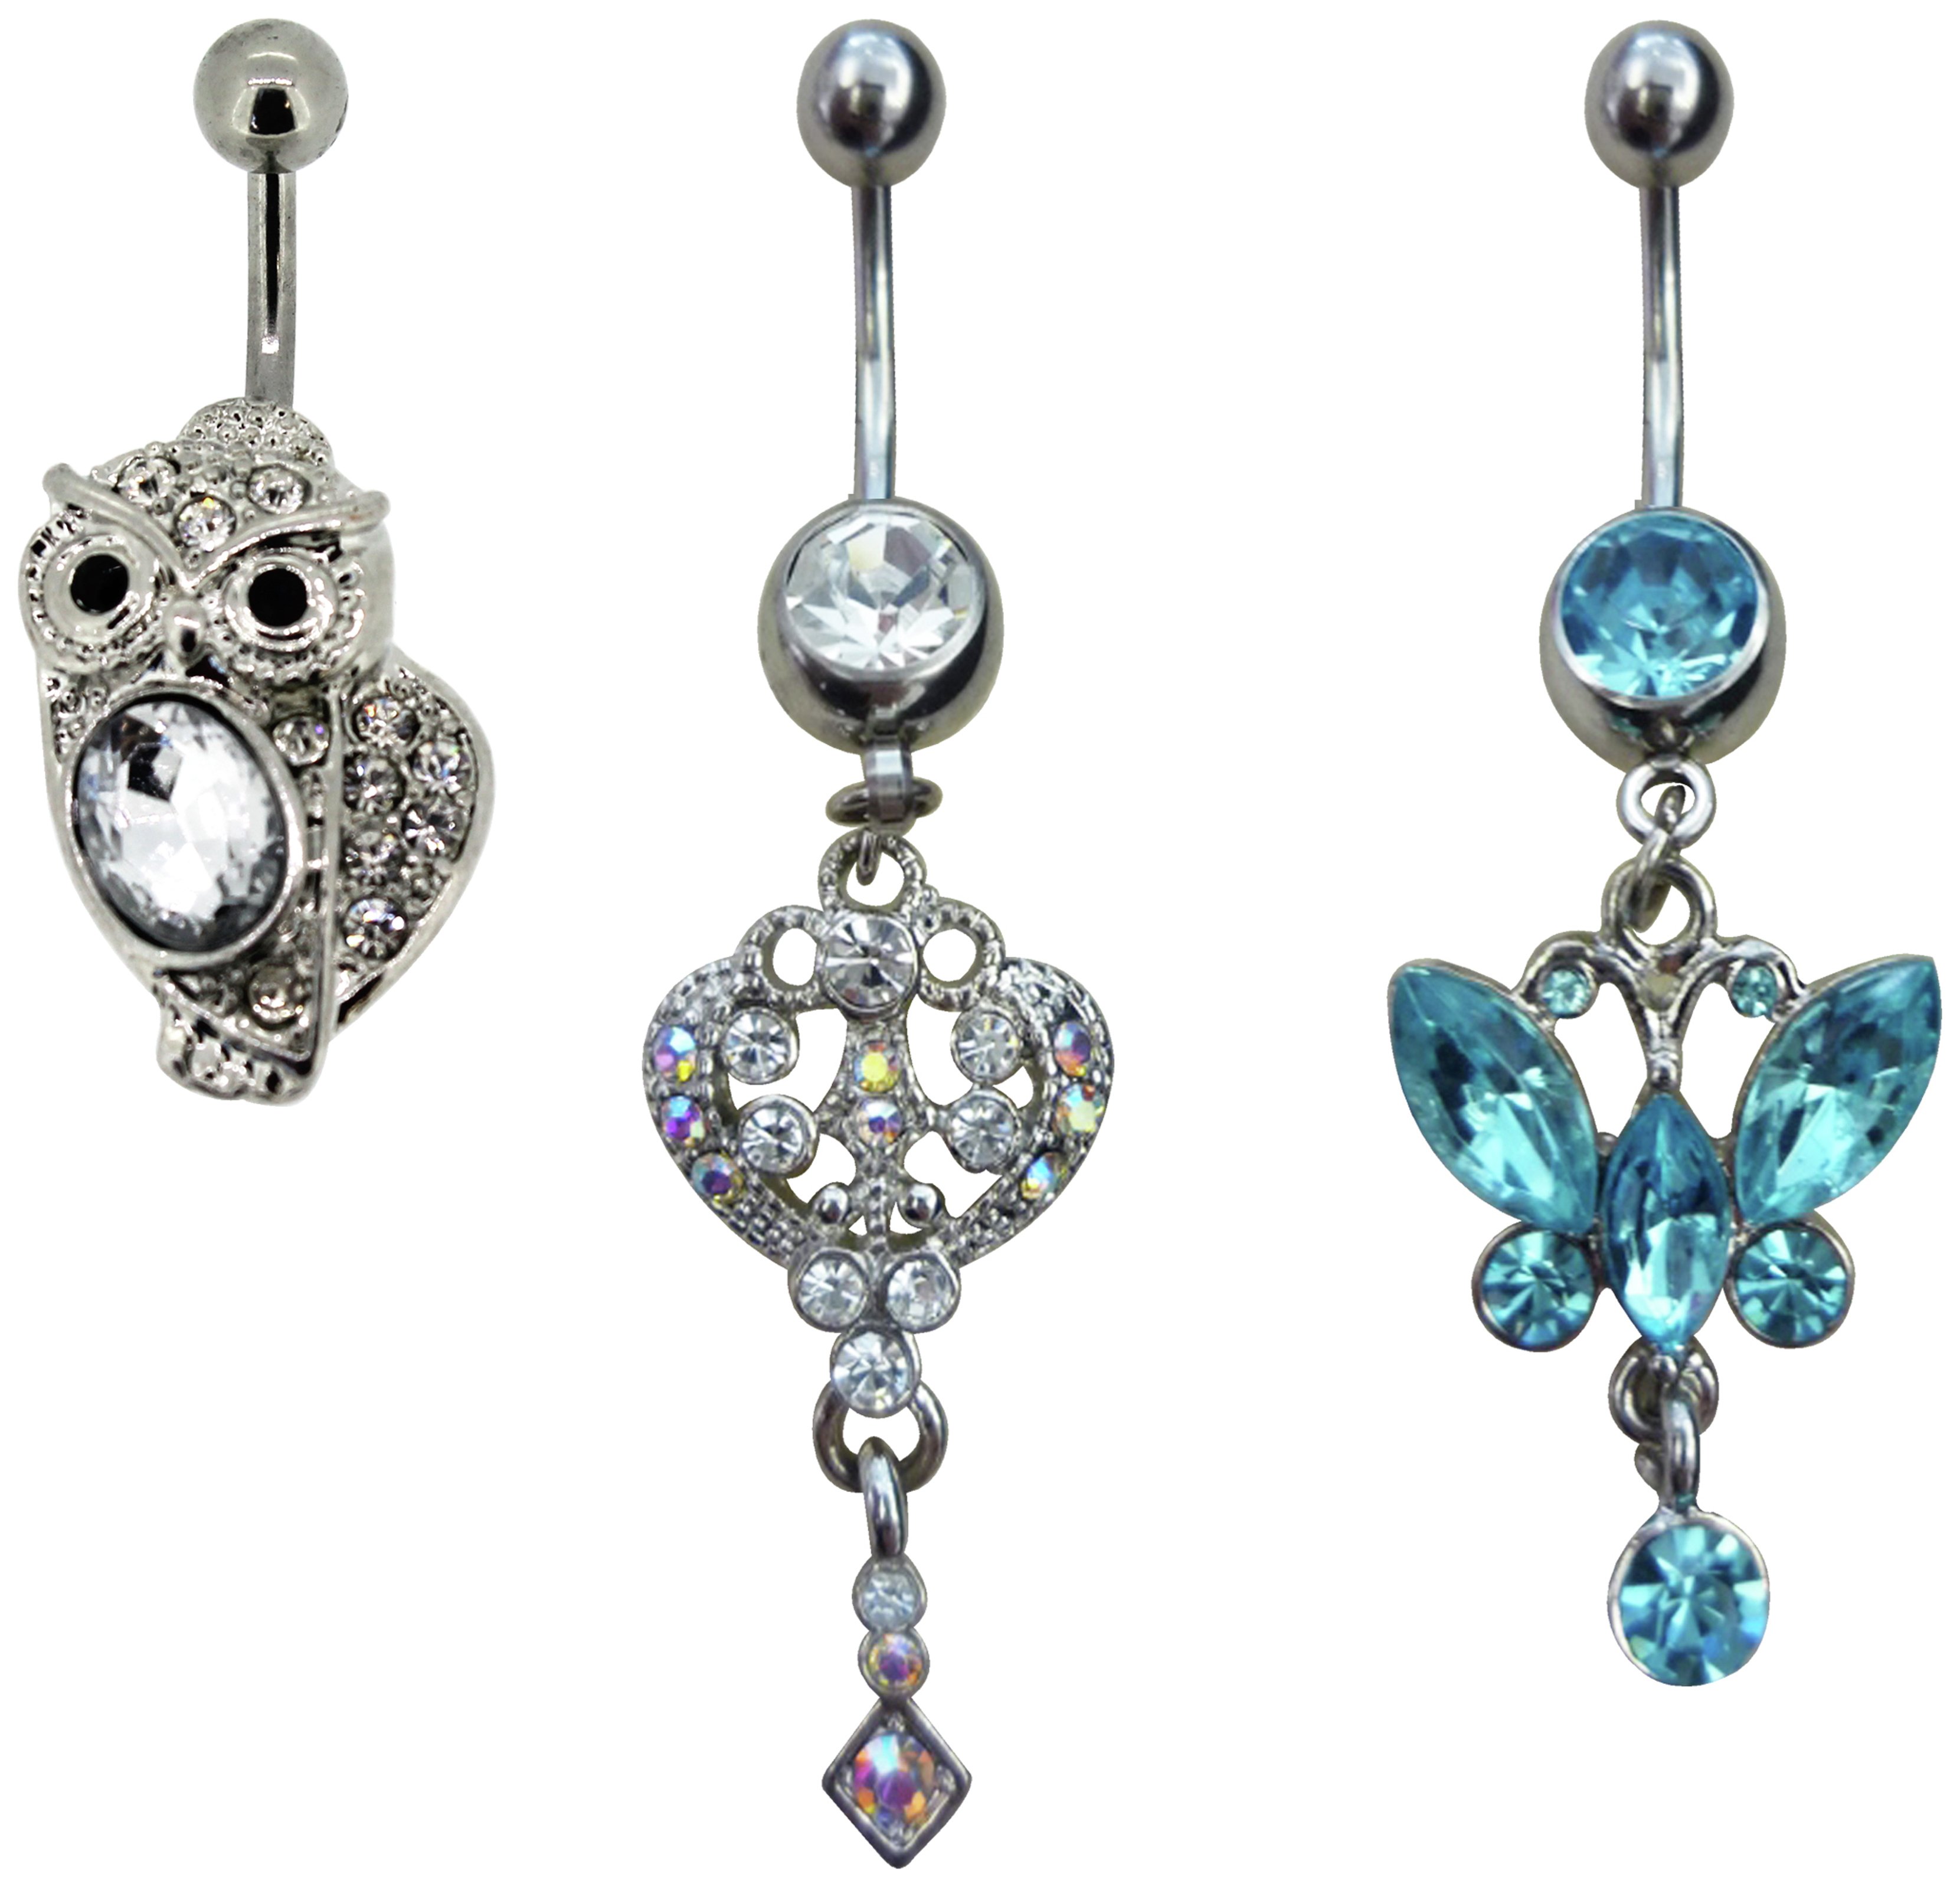 Link Up S.Steel Owl, Butterfly, Key Crystal Belly Bars